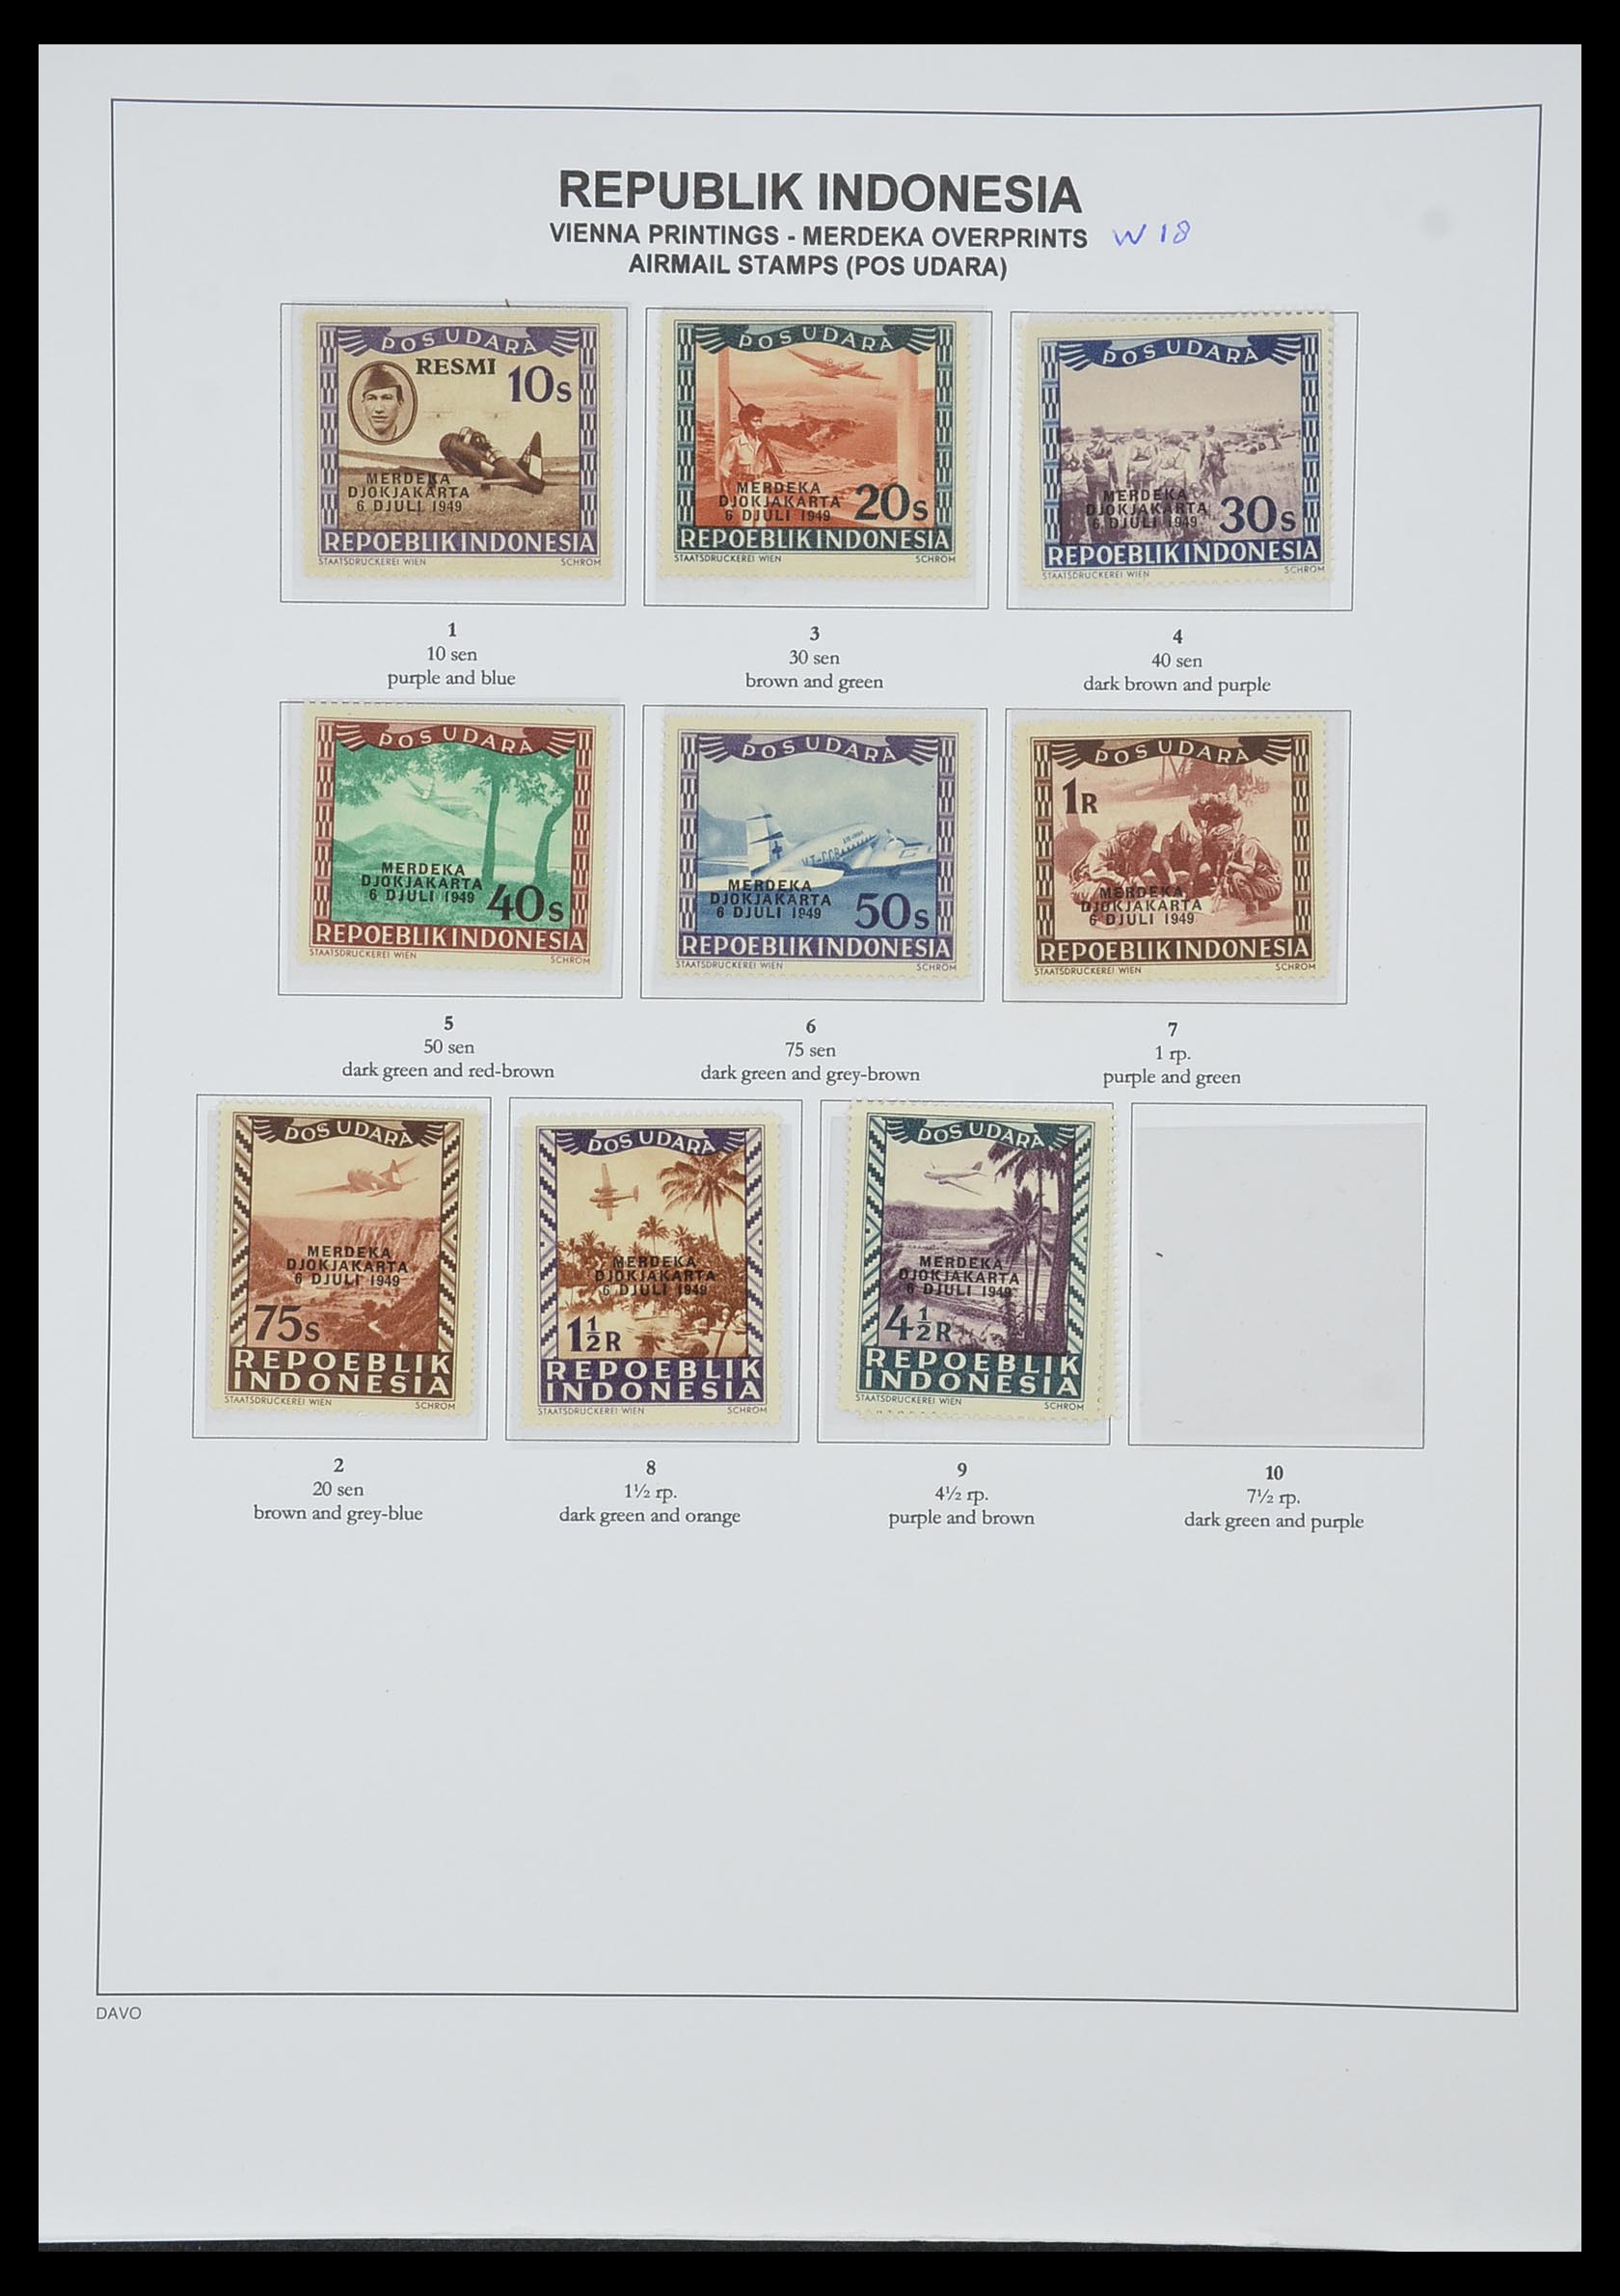 33988 034 - Stamp collection 33988 Vienna printings Indonesia.